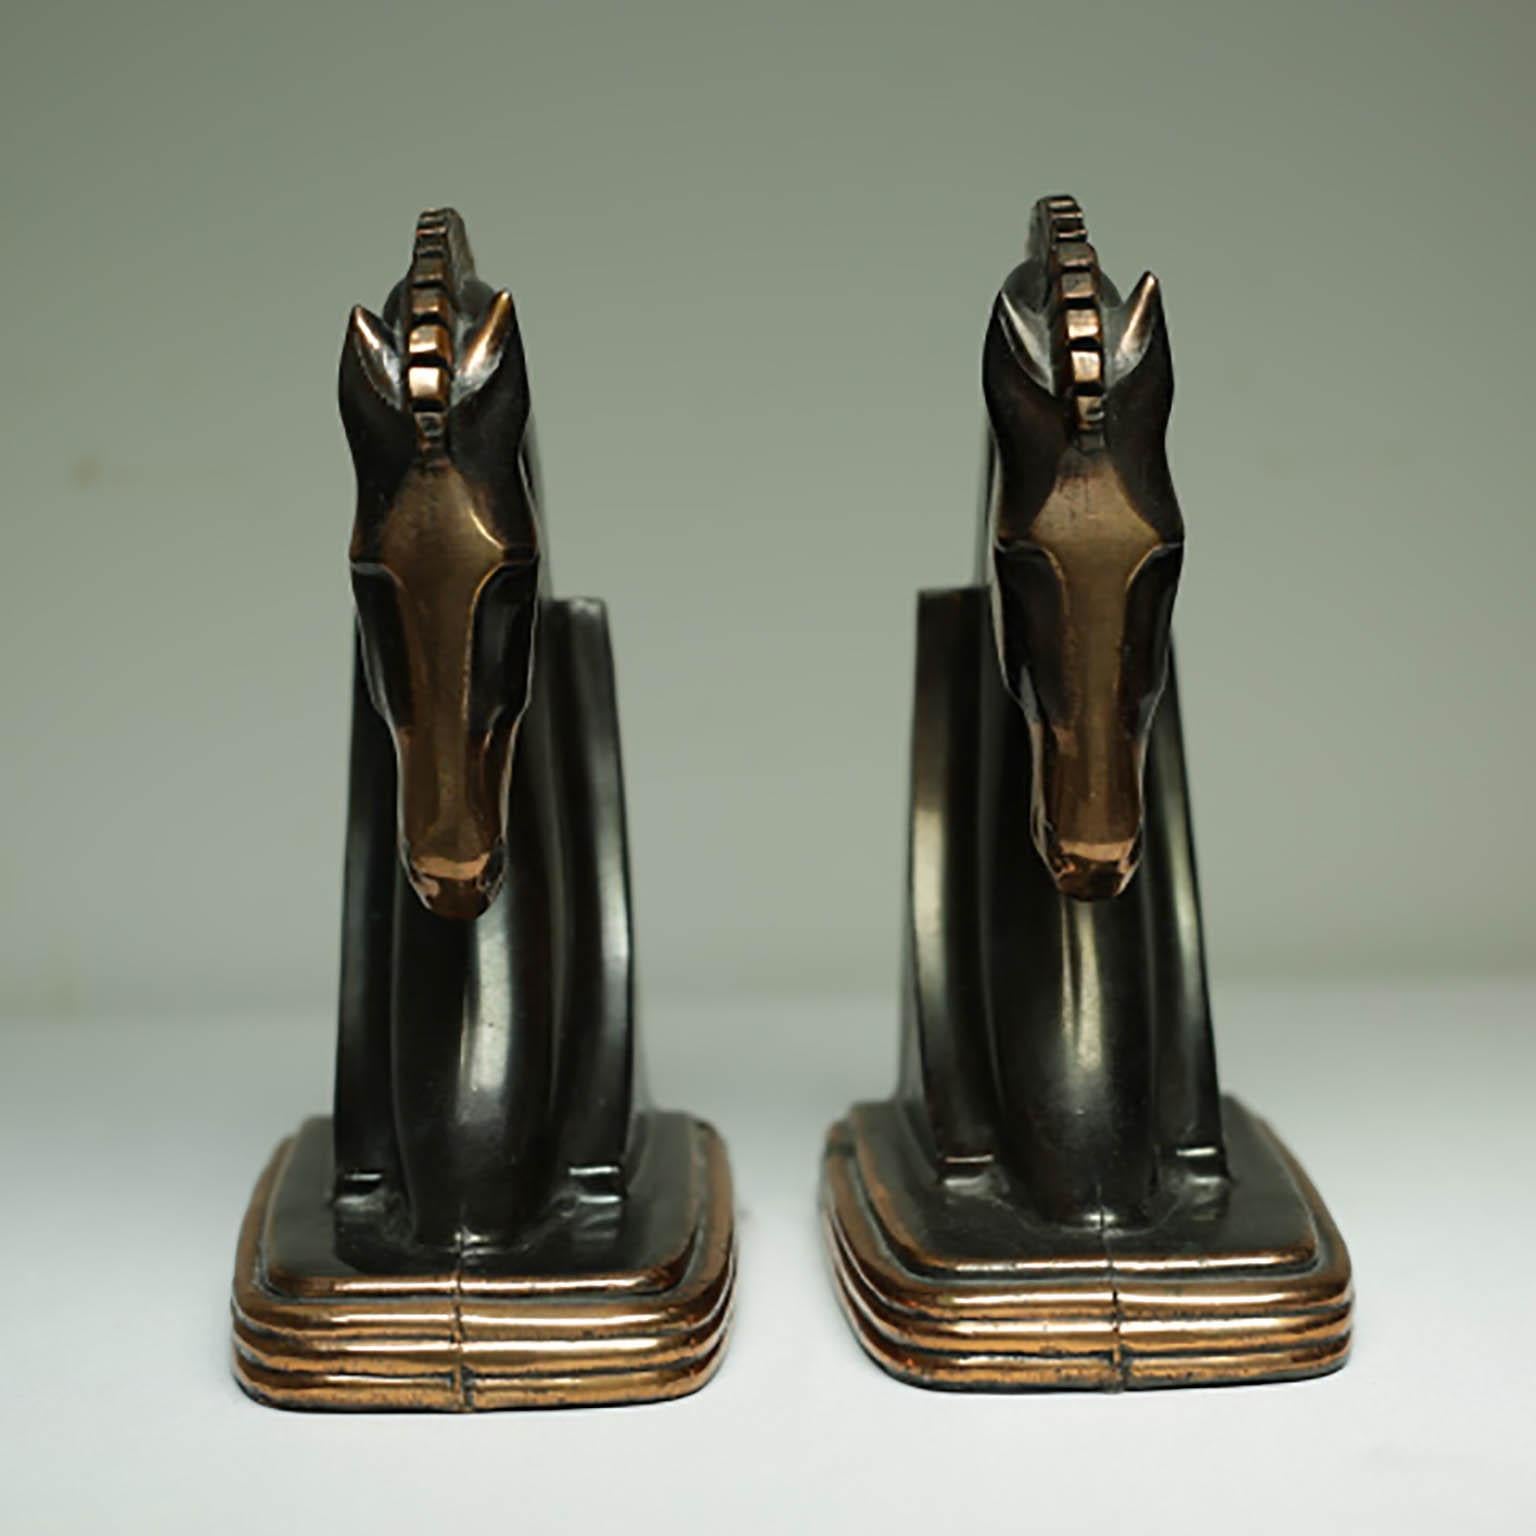 Pair of beautiful two-tone Art Deco bronze/copper-plated Trojan horse bookends by Dodge Inc.